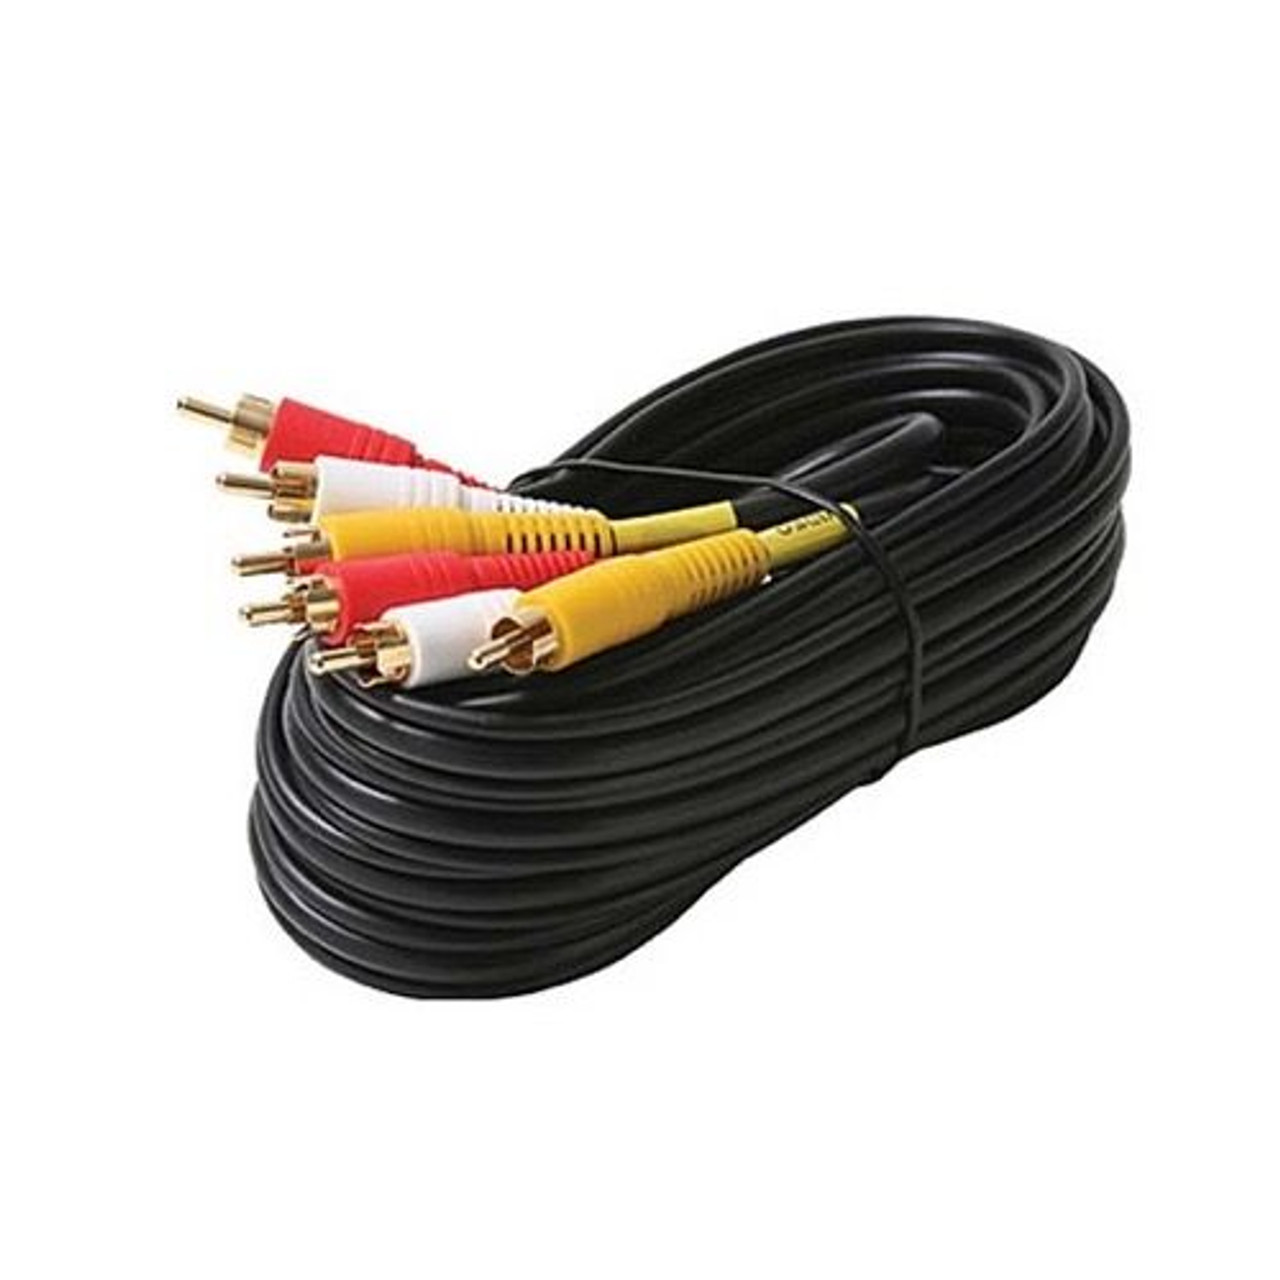 Eagle 12' FT 3 RCA Composite Cable Gold Male to Male Shielded Audio Video Dubbing Gold Plate A/V Composite Cable DIRECTV Audio Video Stereo Shielded Digital Signal DVD VCR, Part # A/V-12